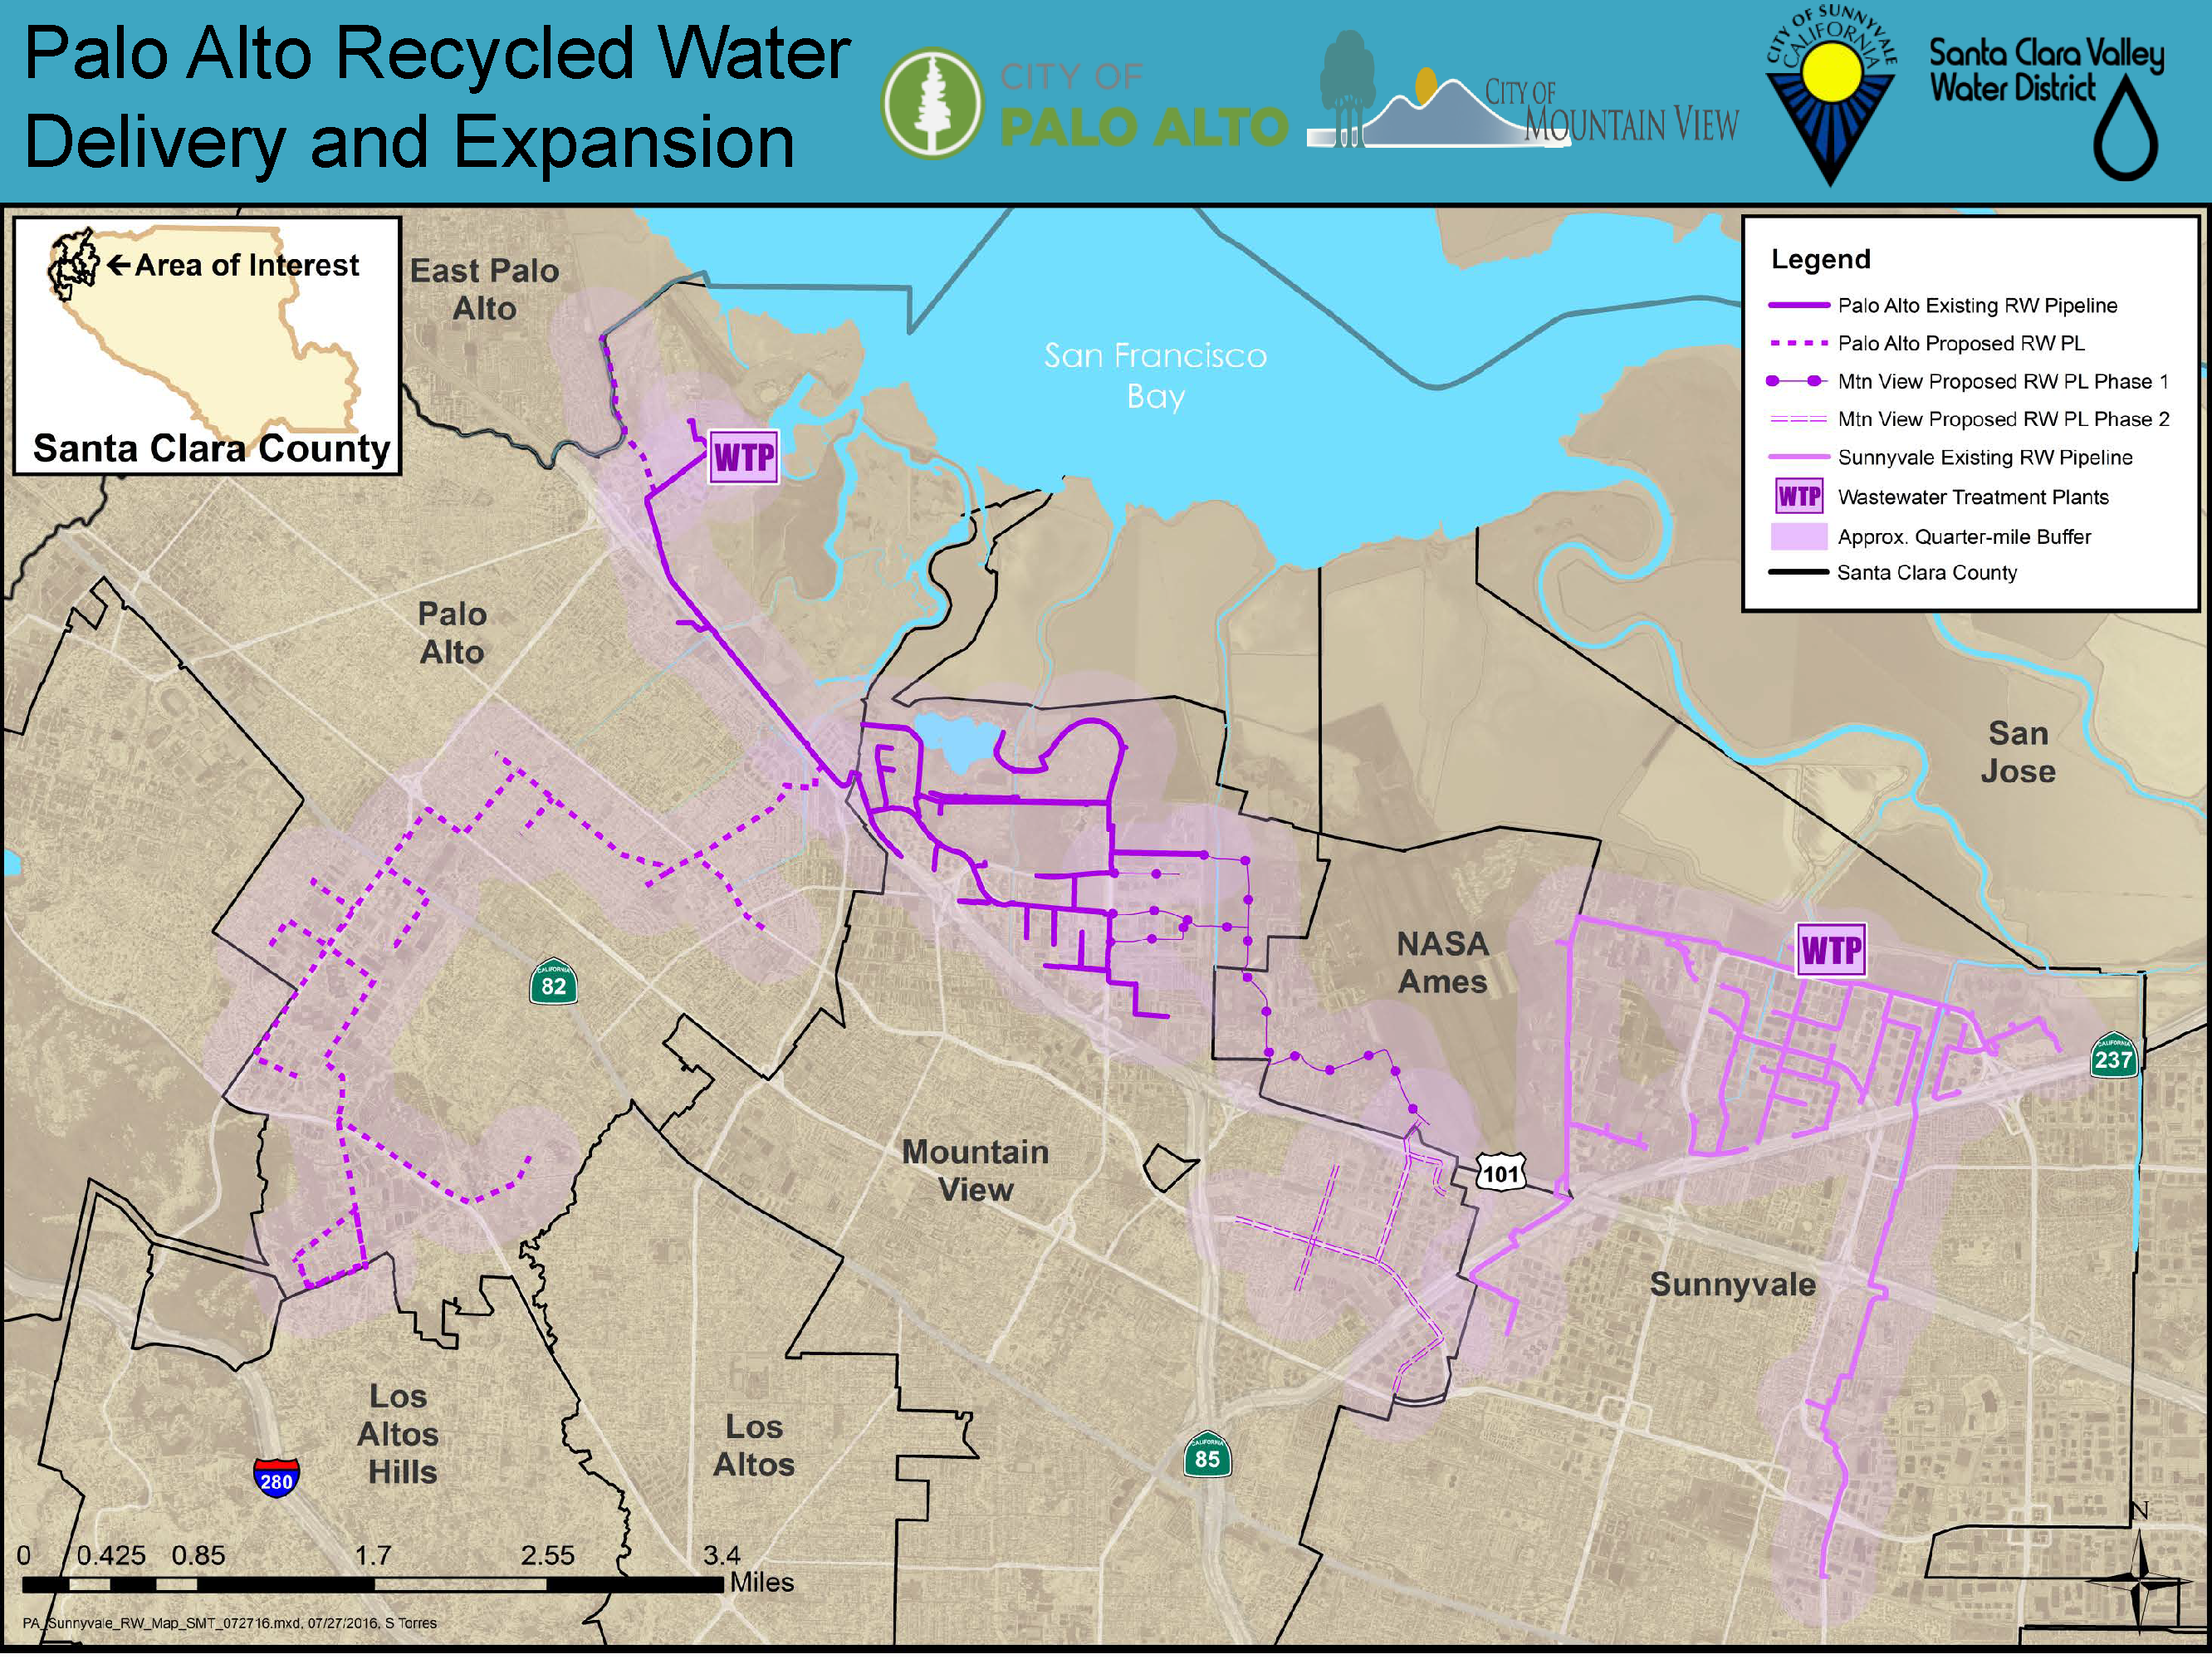 Map - Palo Alto Recycled Water Delivery and Expansion